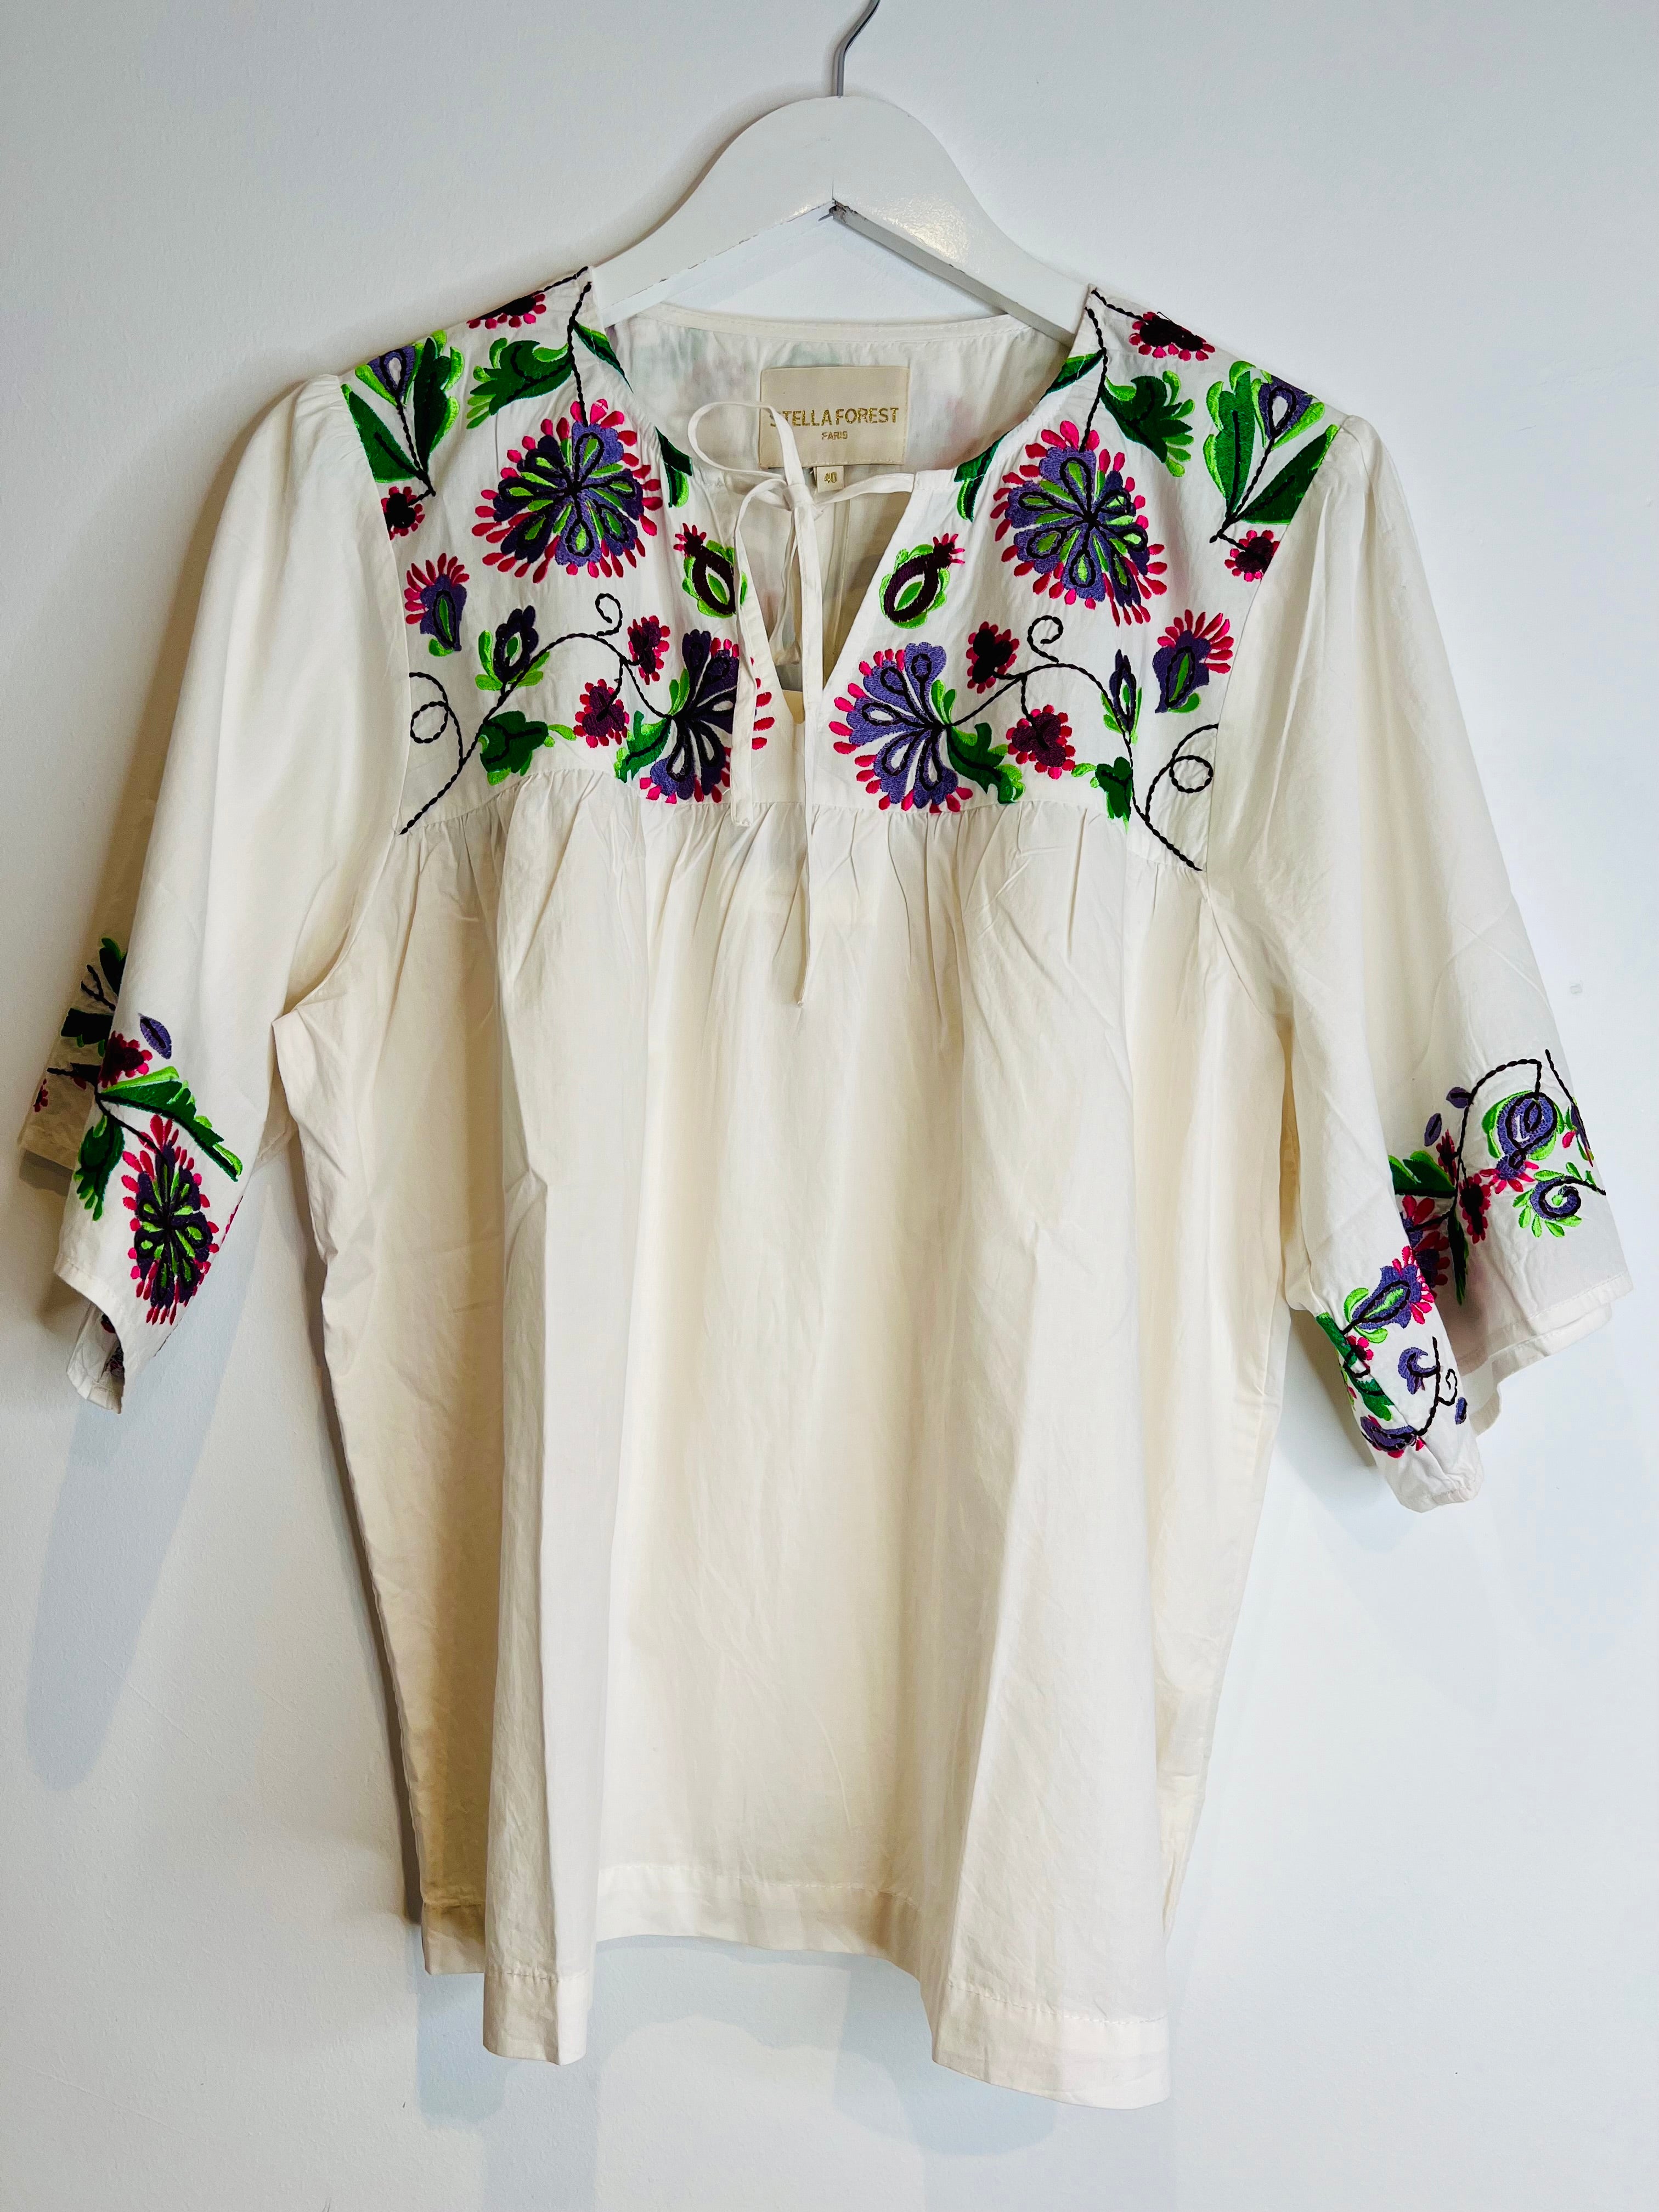 Hetre Alresford Hampshire Clothes Store Stella Forest Embroidered Cream Blouse  